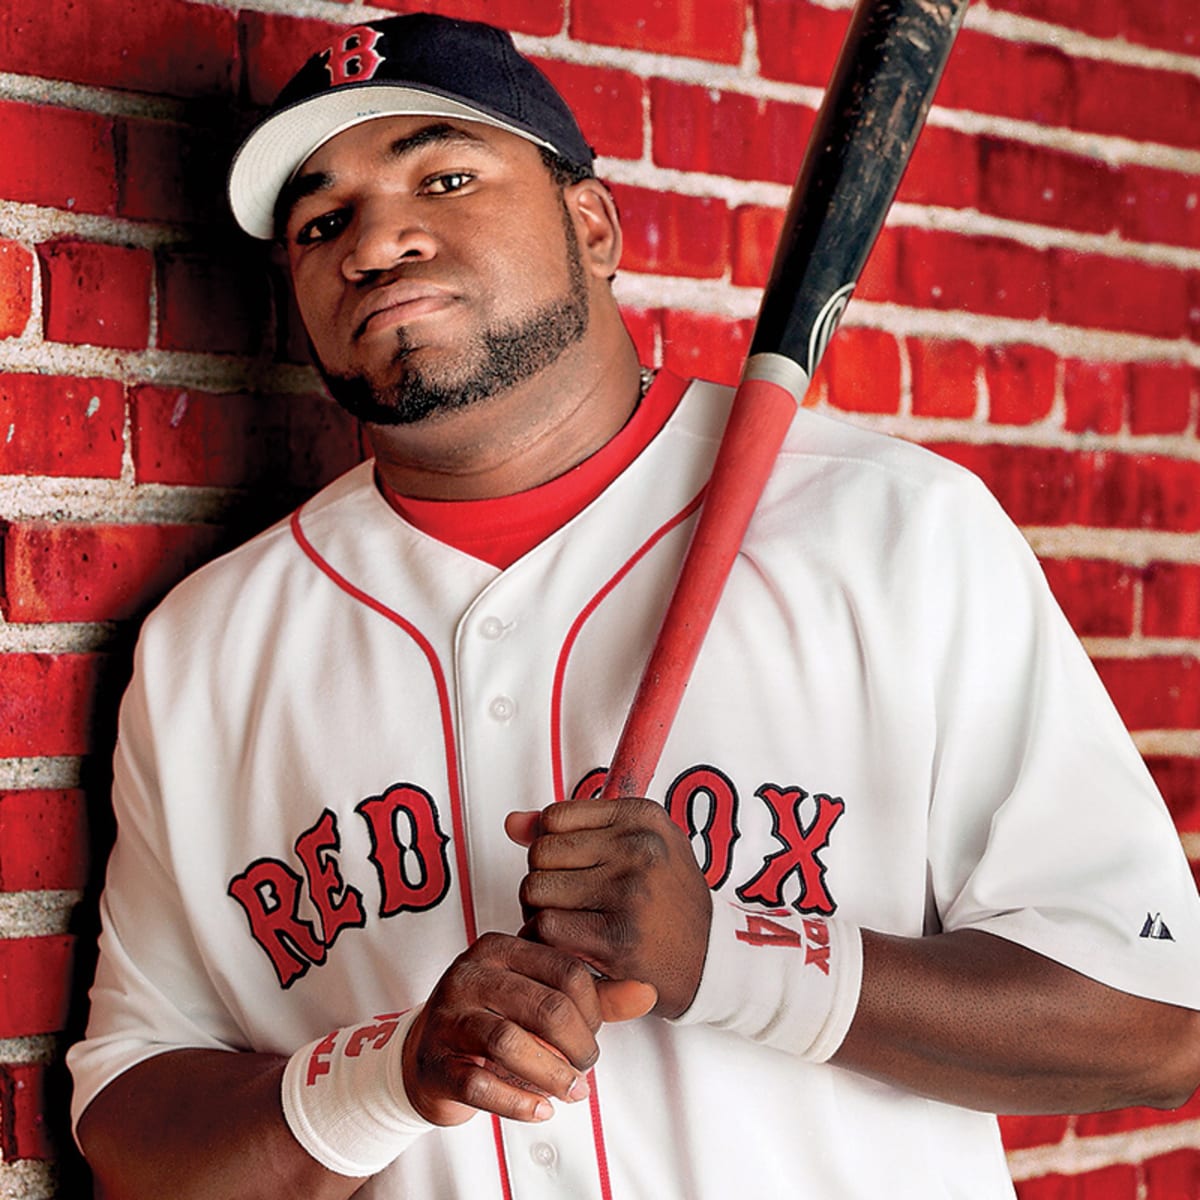 Big Papi and the - Image 1 from Hot Papi: David Ortiz Is Three for 10